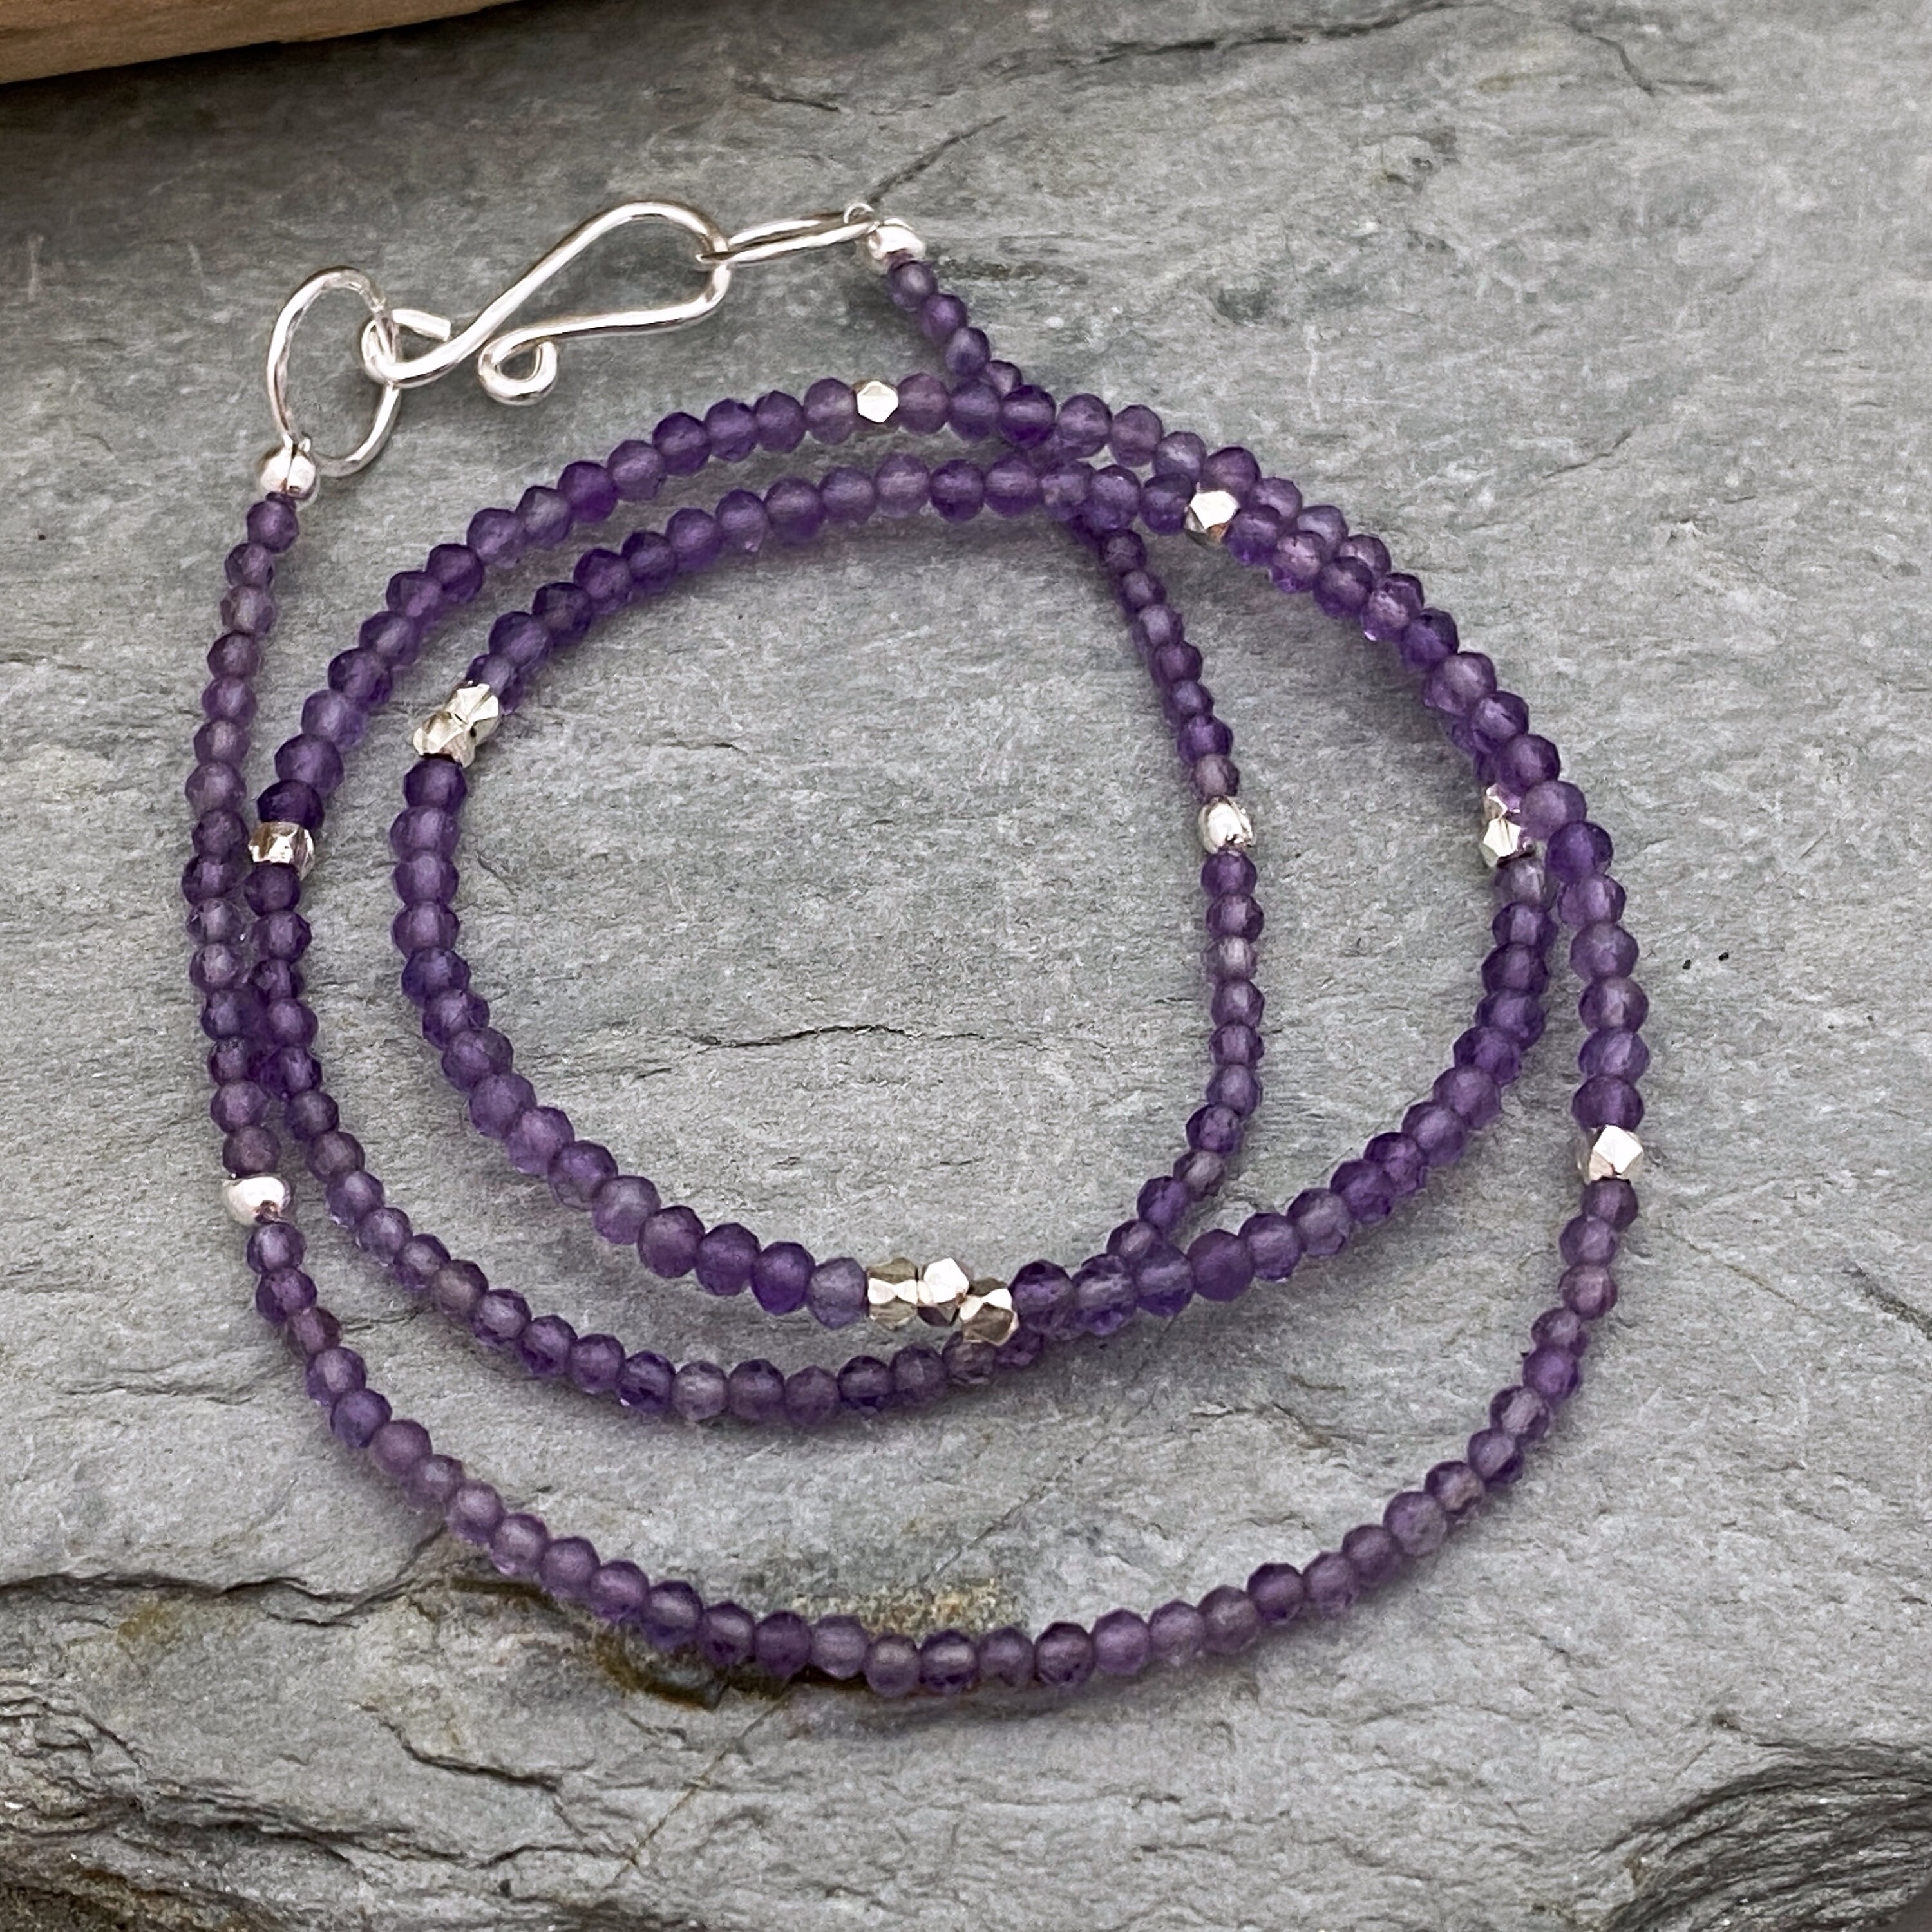 Amethyst Necklace With Silver Beads, Tiny Sparkly Purple & Delicate Necklace. February Birthstone